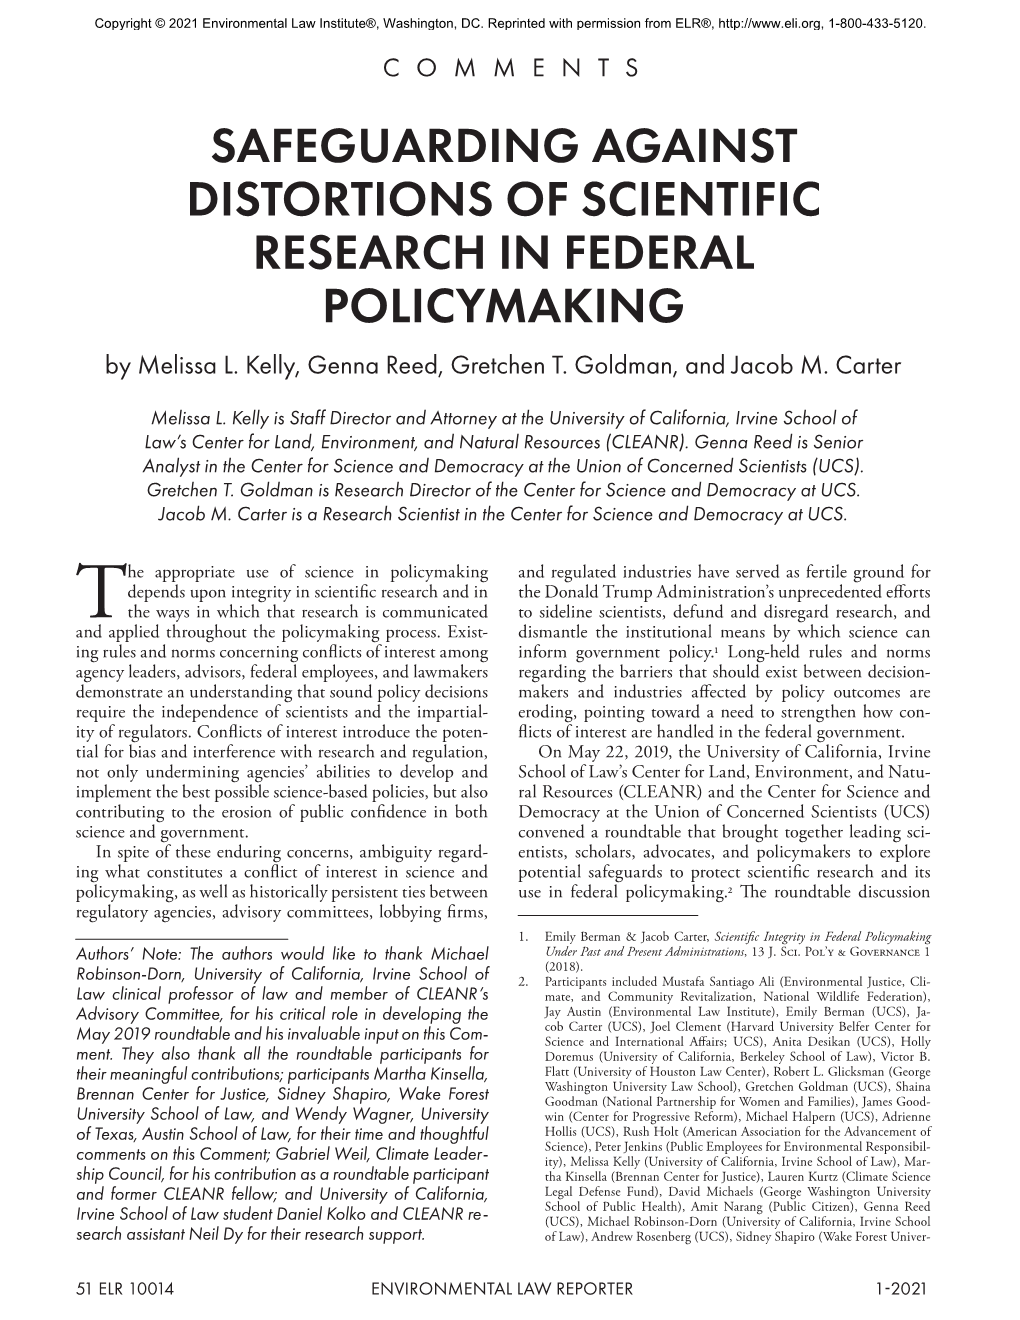 SAFEGUARDING AGAINST DISTORTIONS of SCIENTIFIC RESEARCH in FEDERAL POLICYMAKING by Melissa L